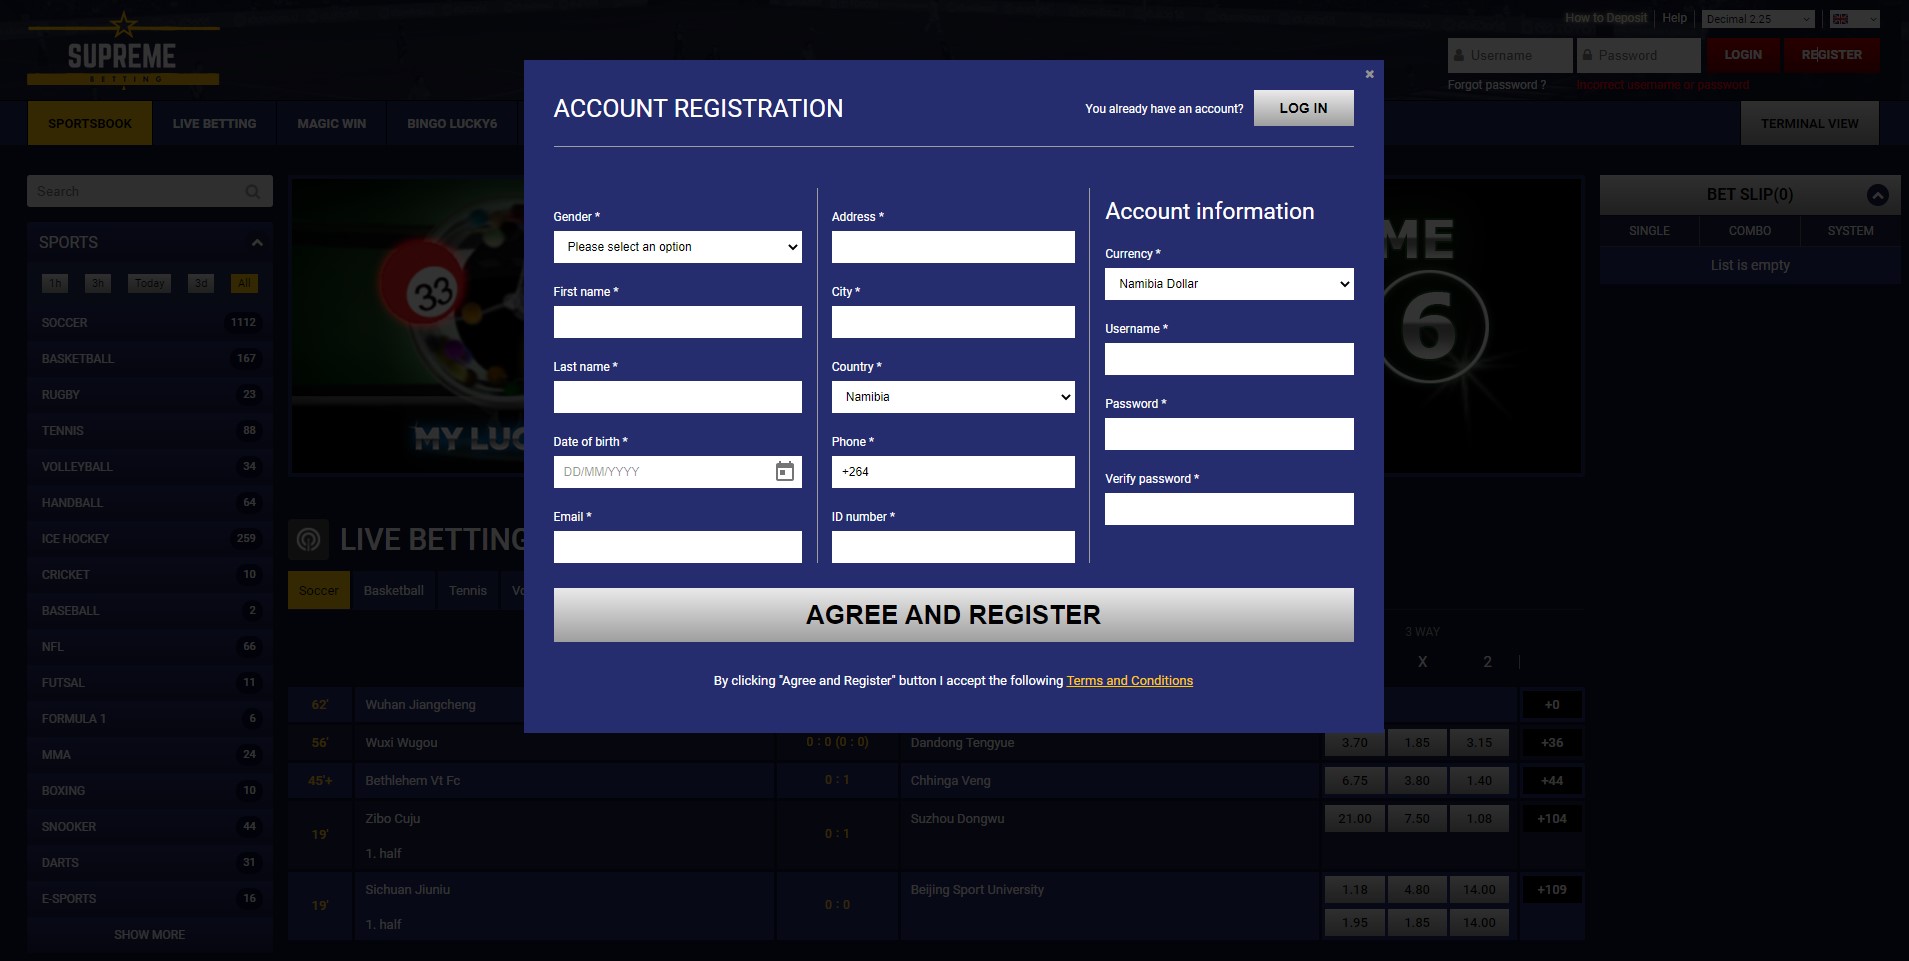 Supreme betting registeration page